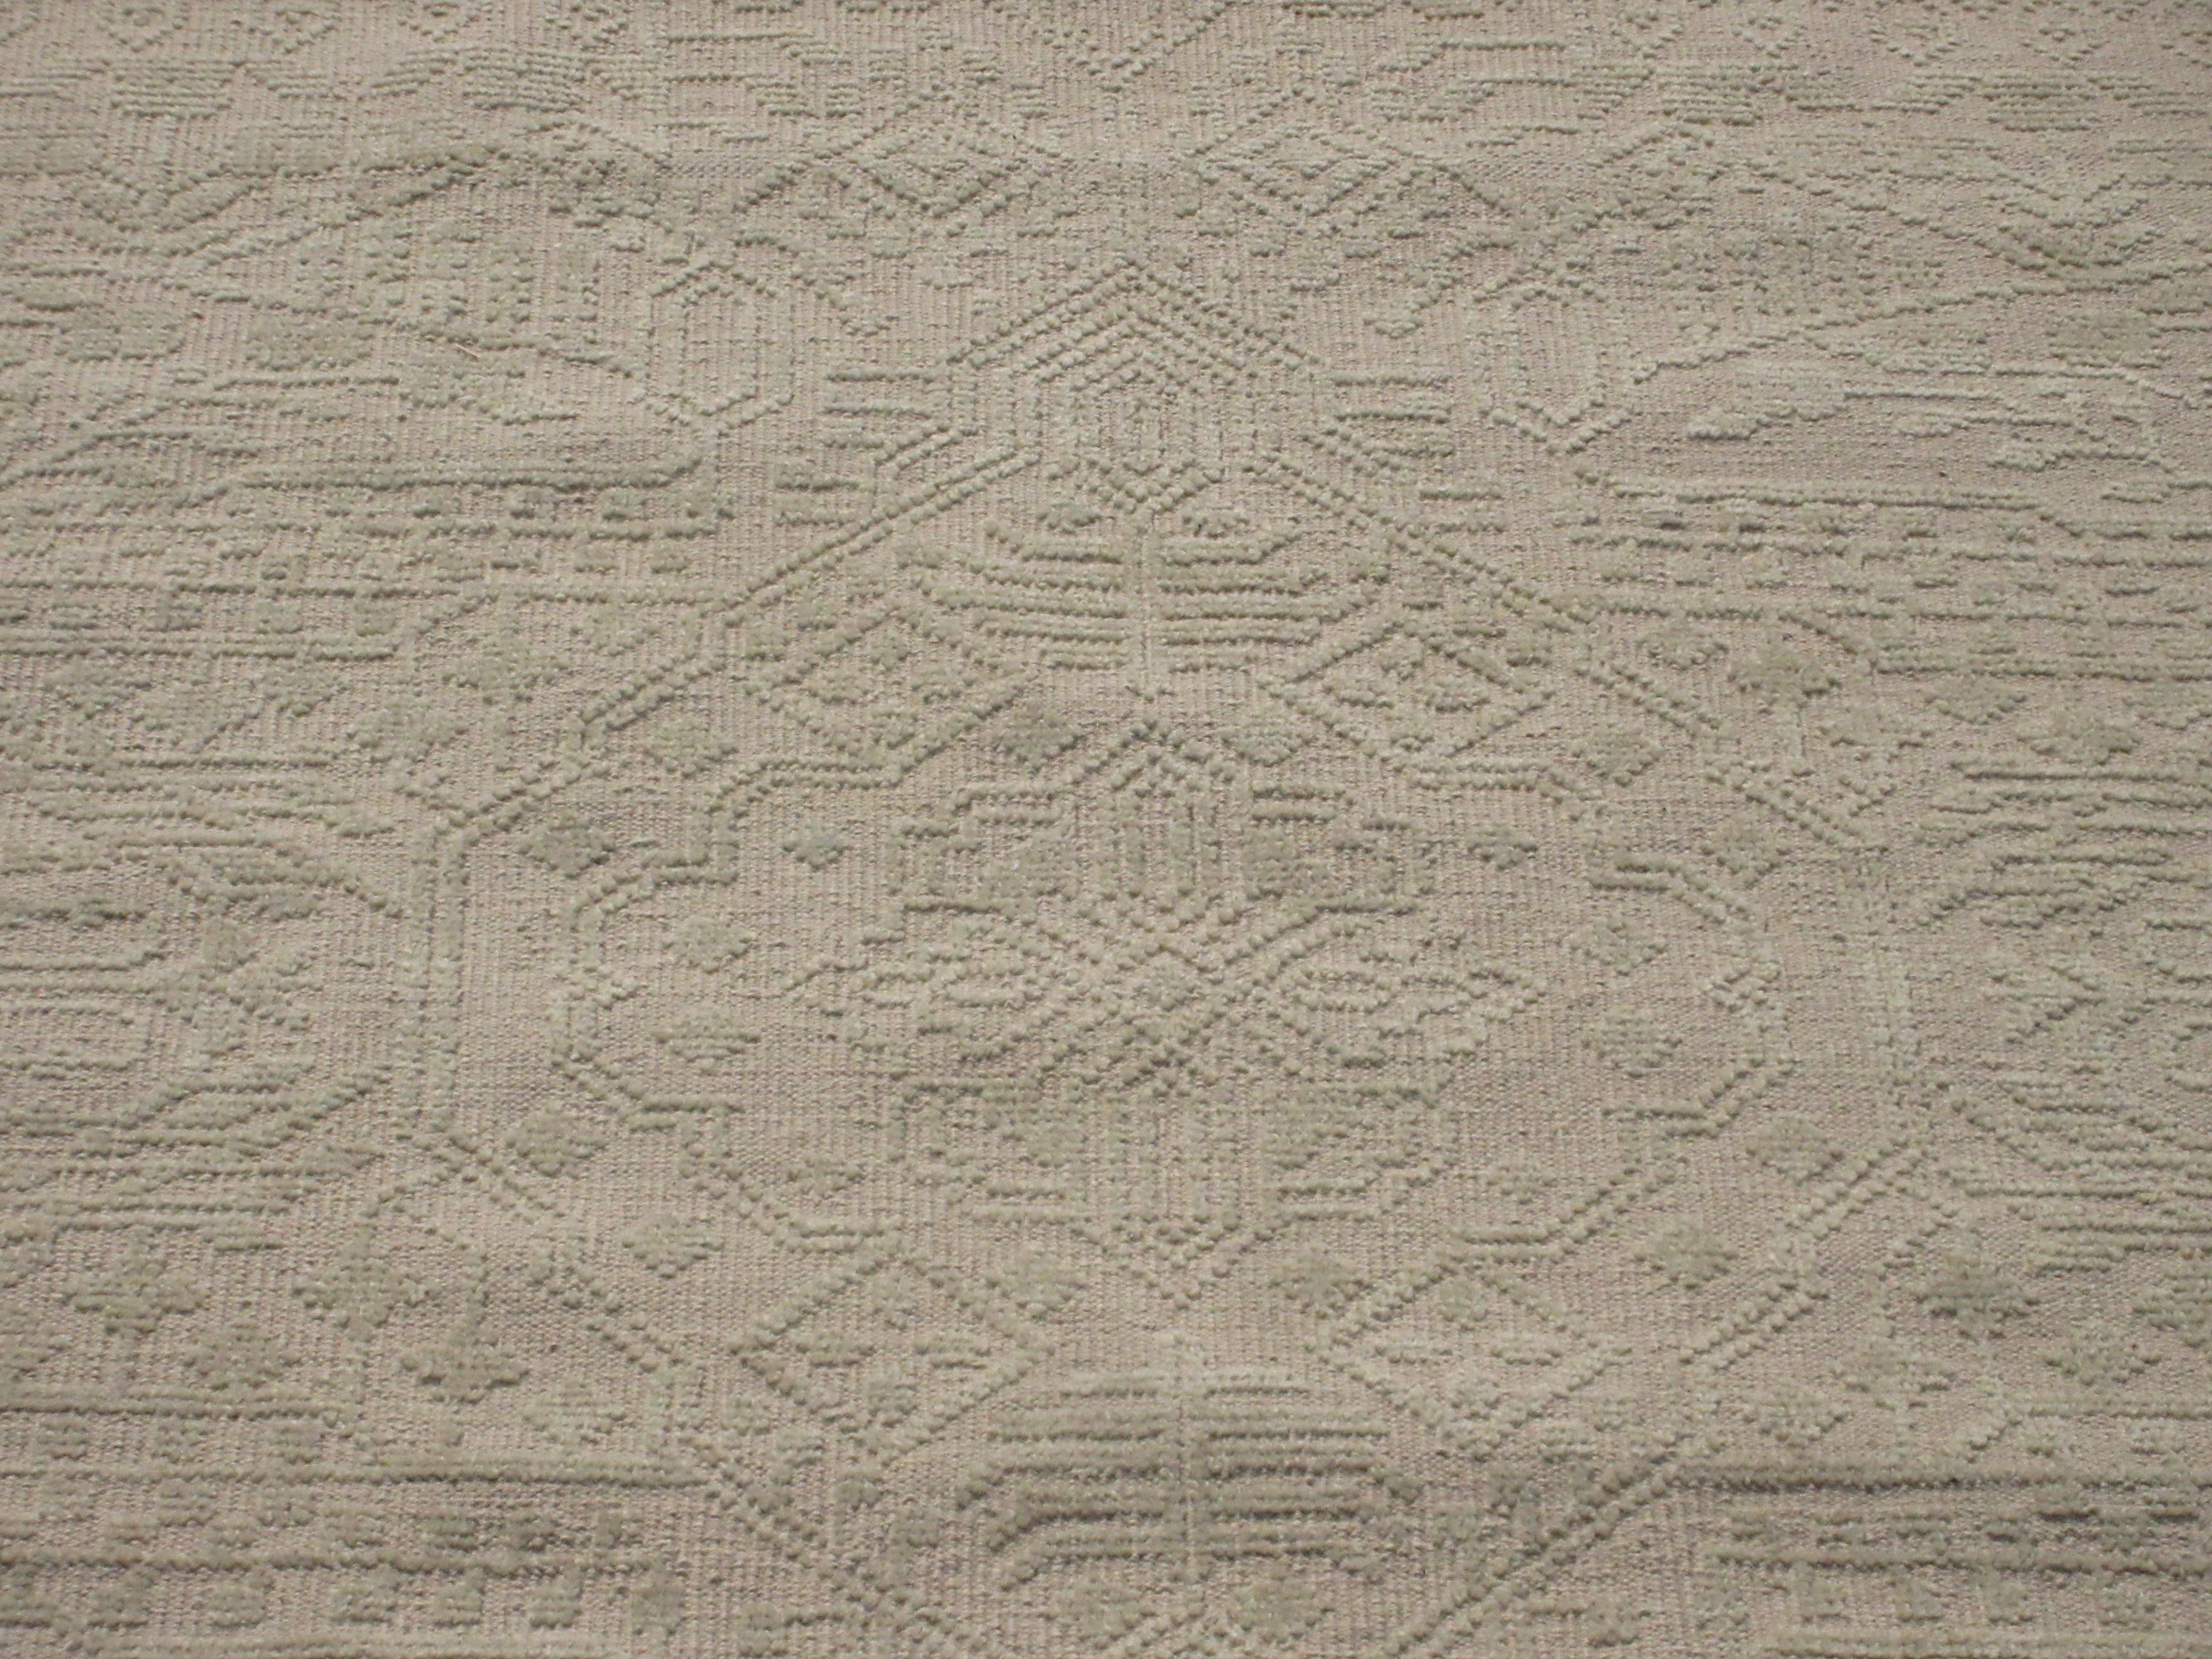 Hand-knotted, high-low wool pile on a cotton foundation.

Dimensions: 7'8